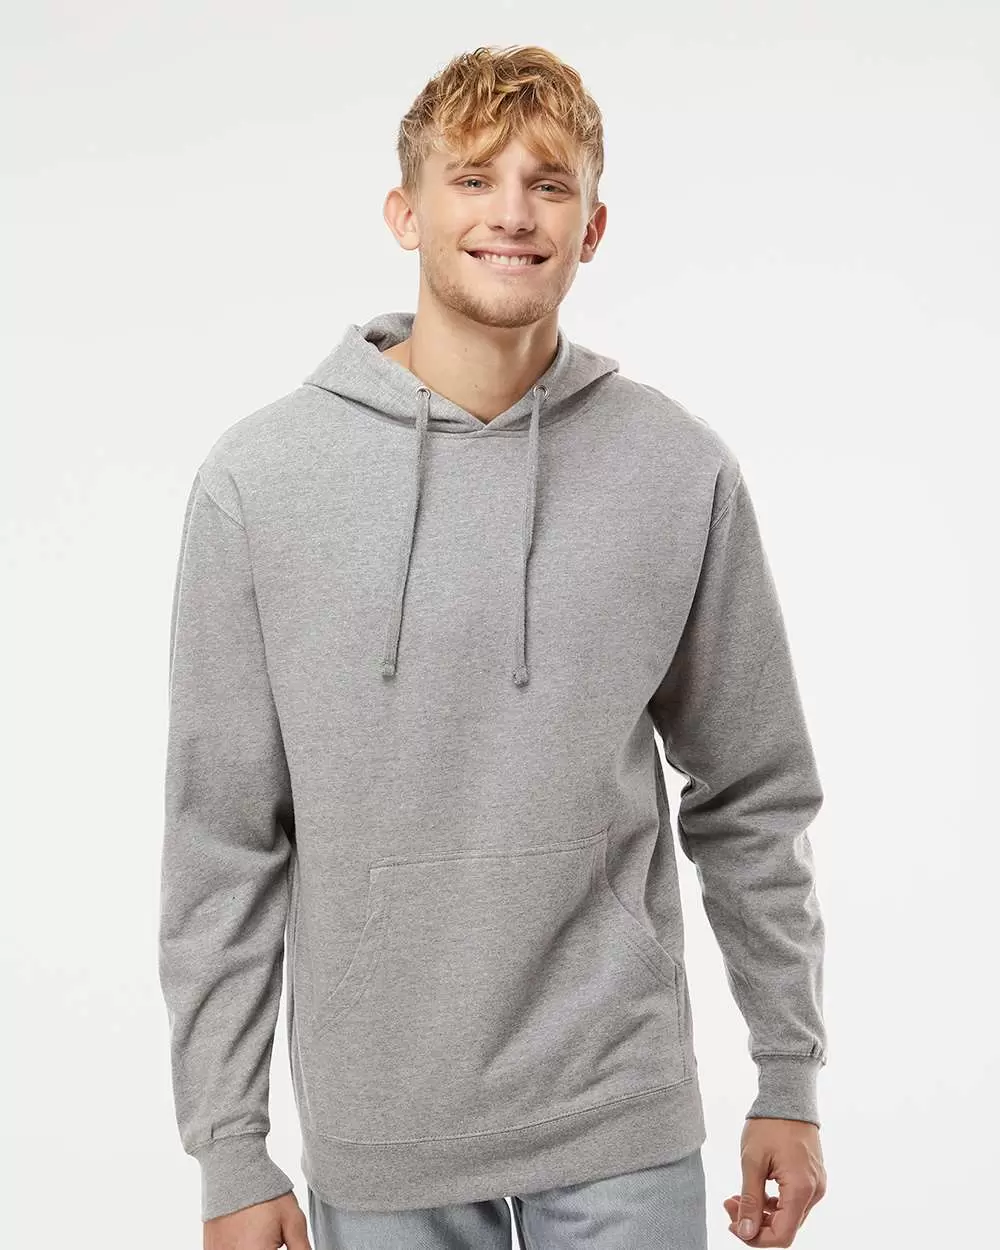 Independent Trading Co. SS4500 Midweight Hoodie - From $12.31